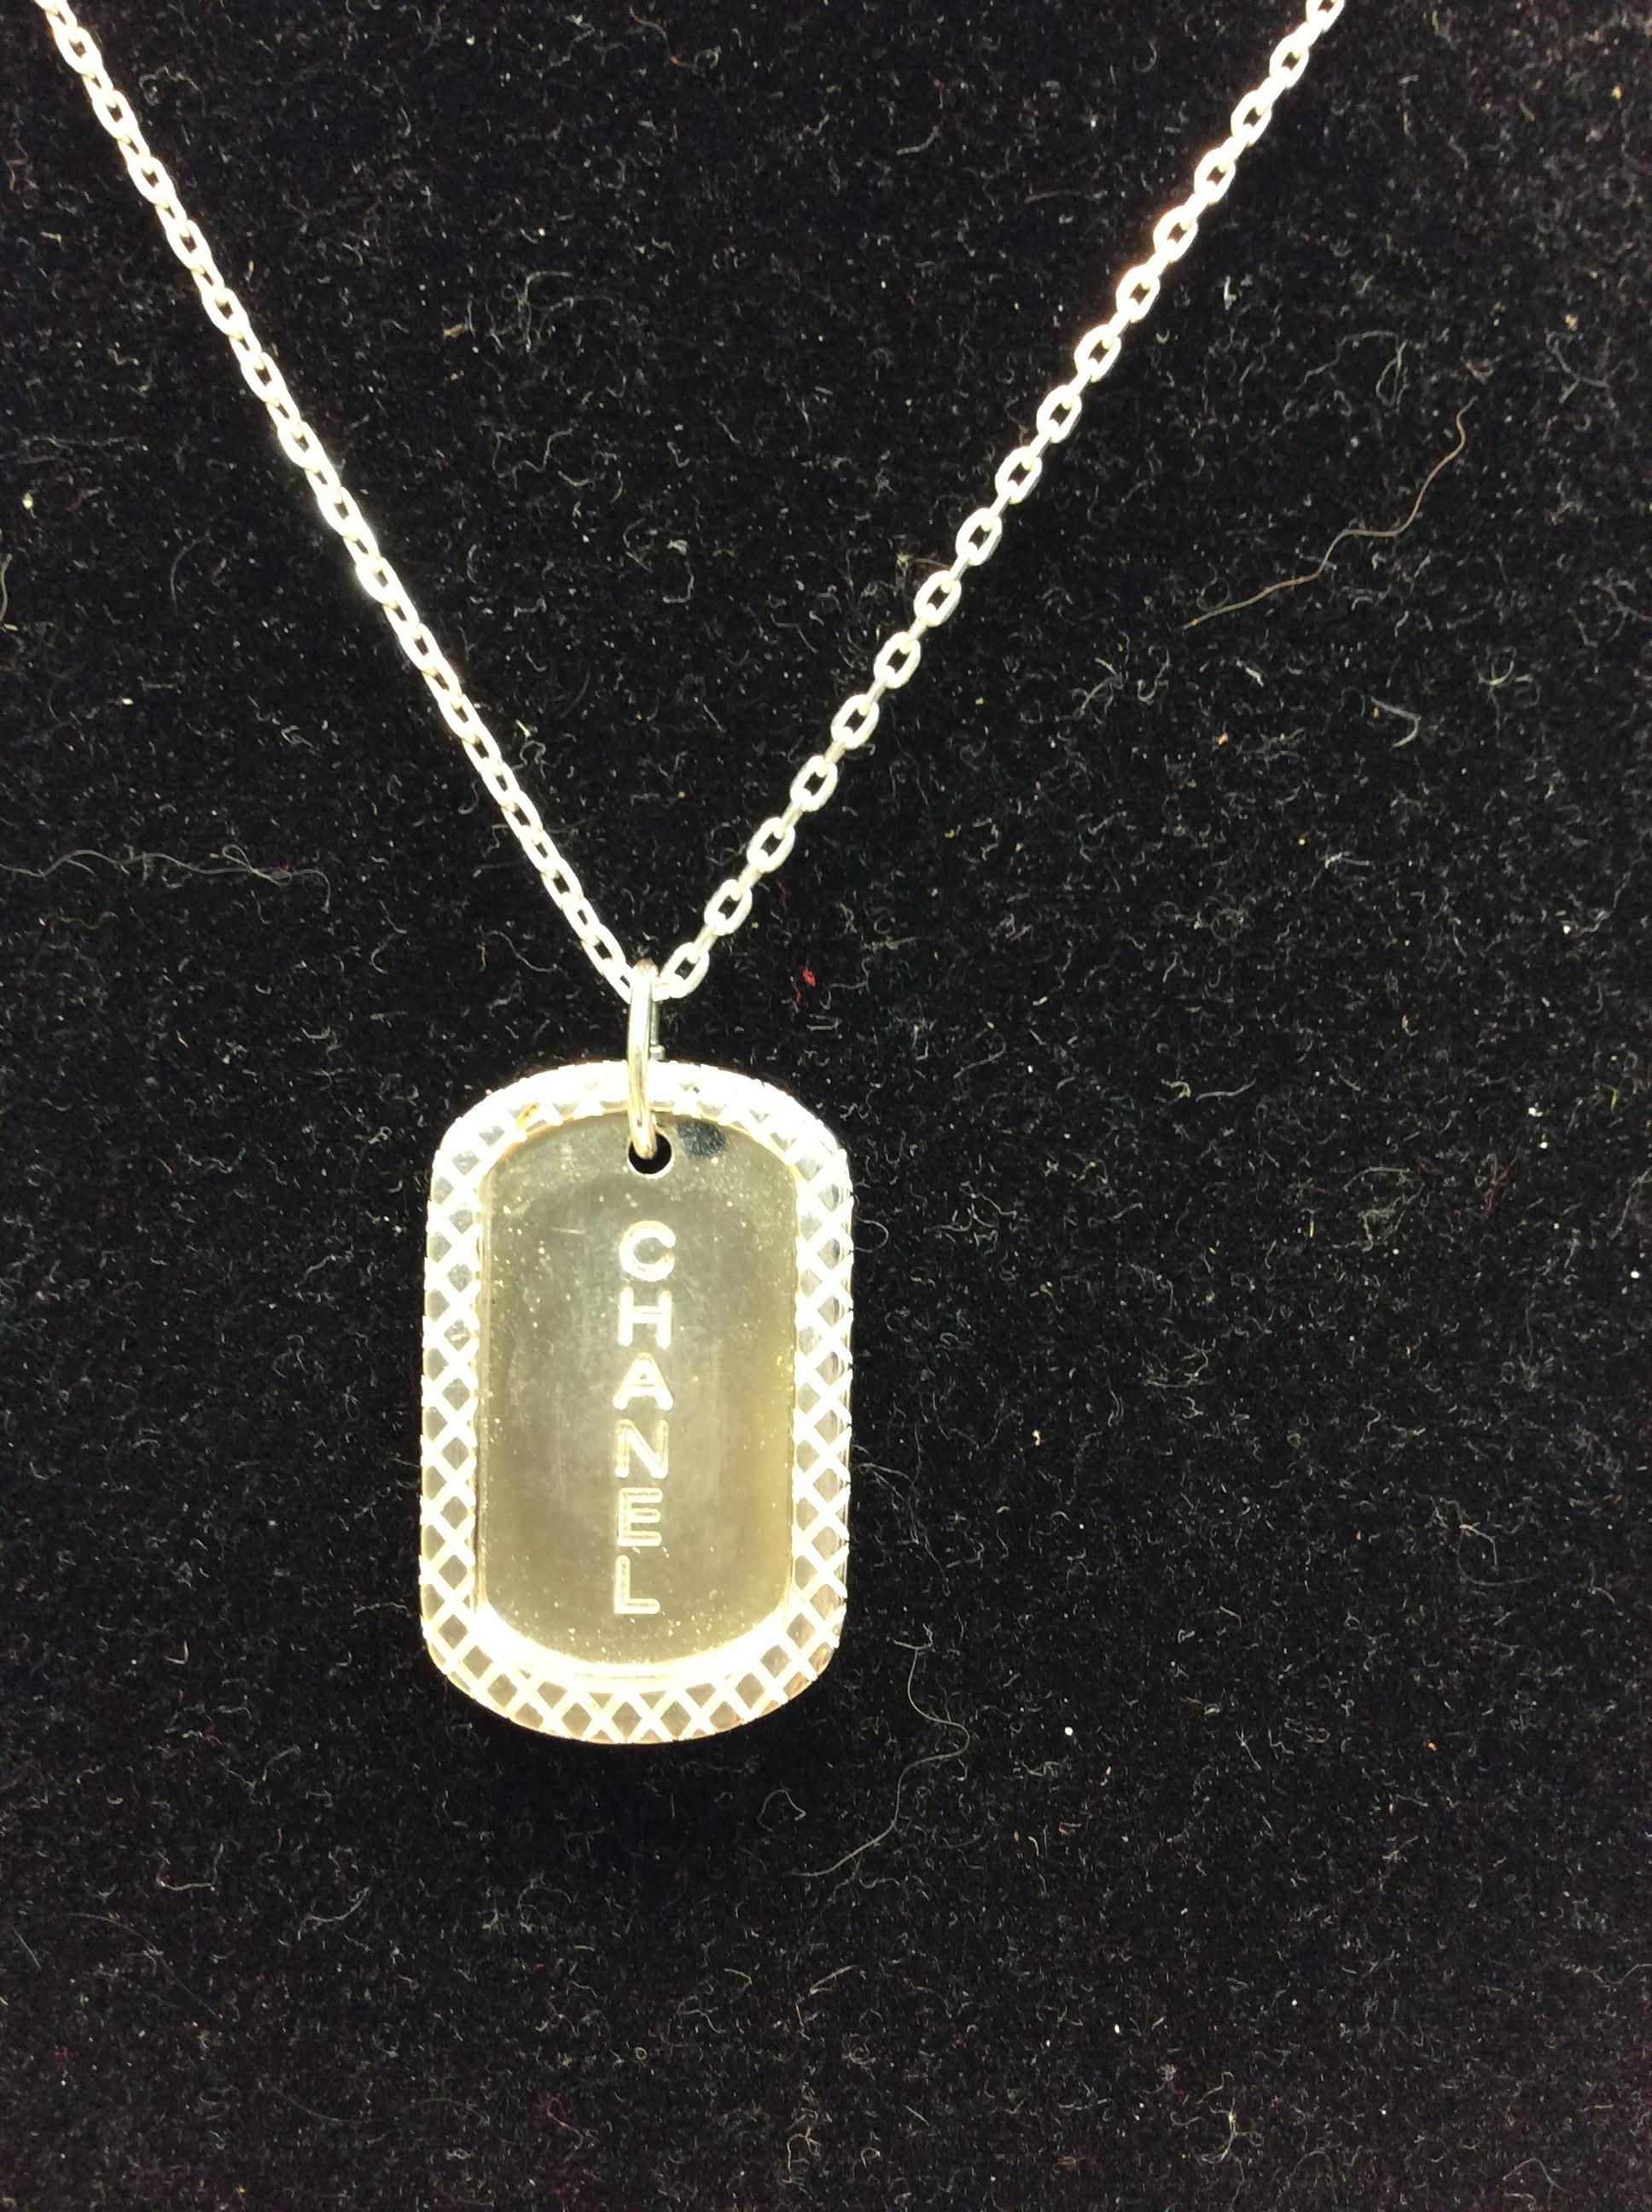 Chanel Silver Small Dog Tag Necklace
$299
Made in France
Comes with box
9.5